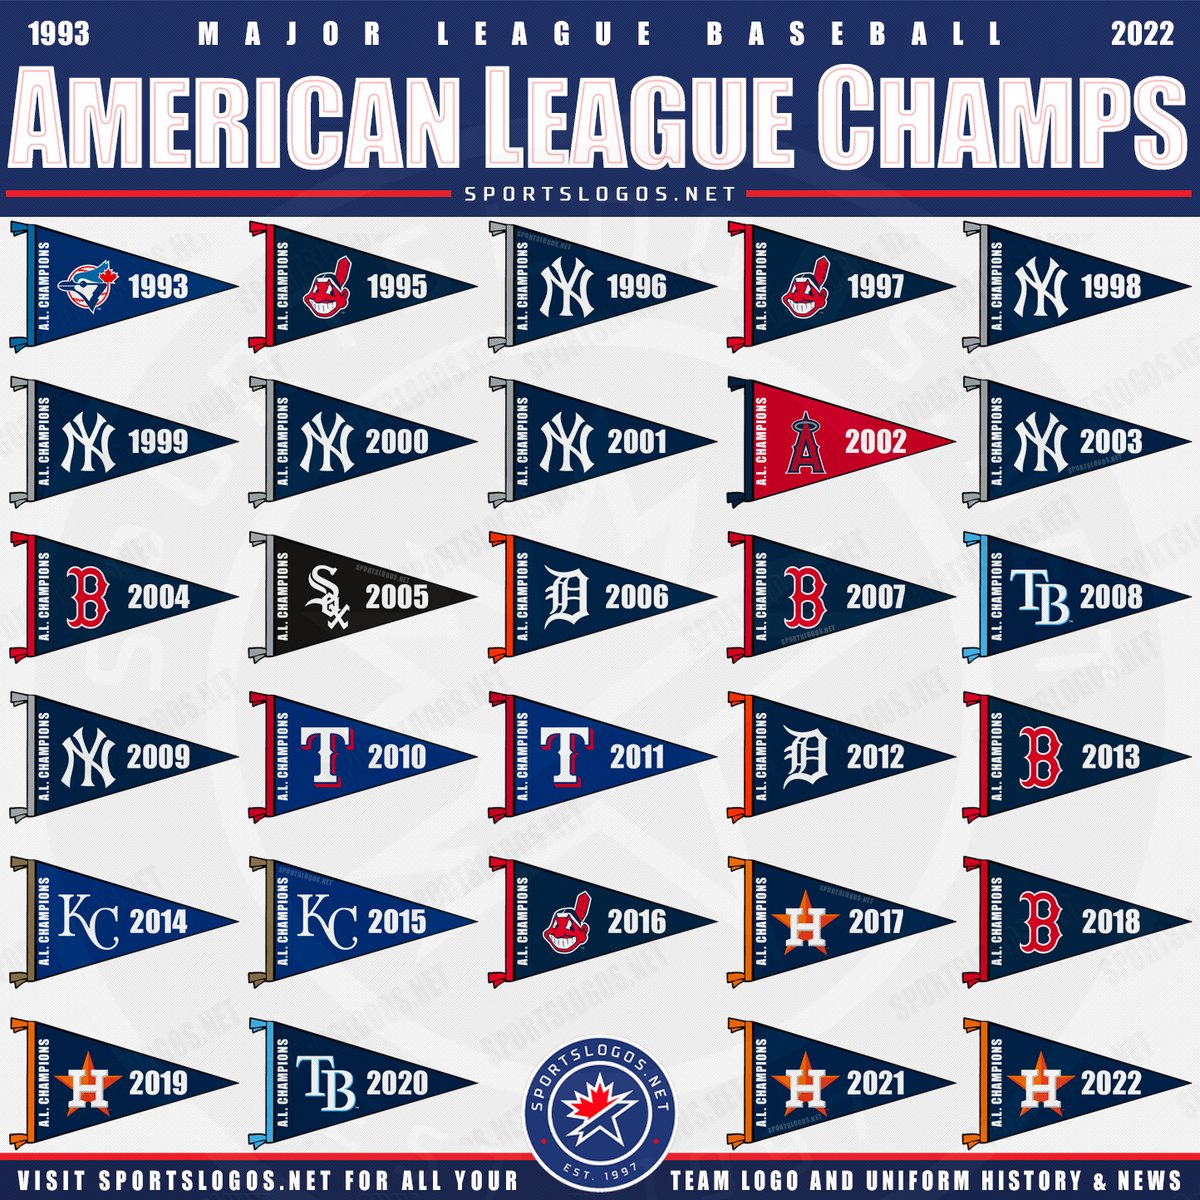 RT if your team has won an American League pennant in the last 30 seasons! (And no, it doesn't matter how many times the Astros win, I'll just never get used to them being in the AL) See the AL Champs teams logos all the way back to 1902 right here: sportslogos.net/logos/list_cha…